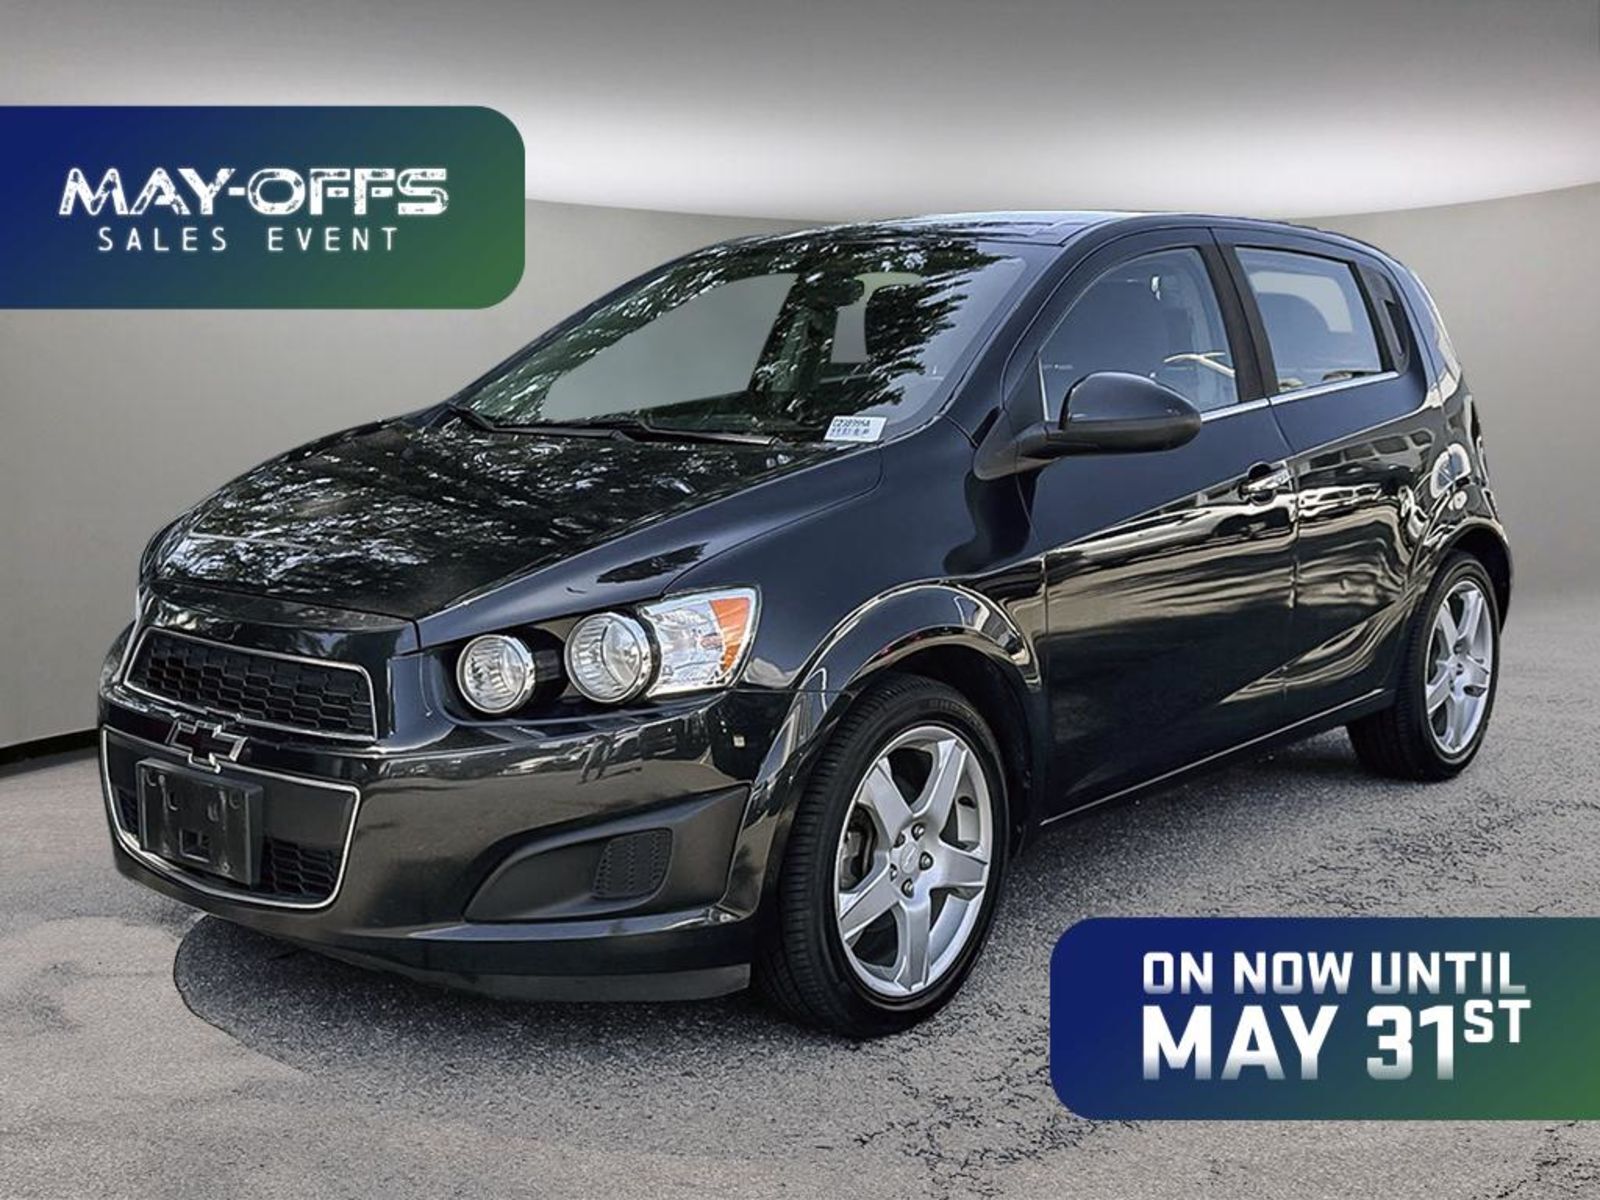 2014 Chevrolet Sonic LT - Manual / Cruise Control / No Extra Fees